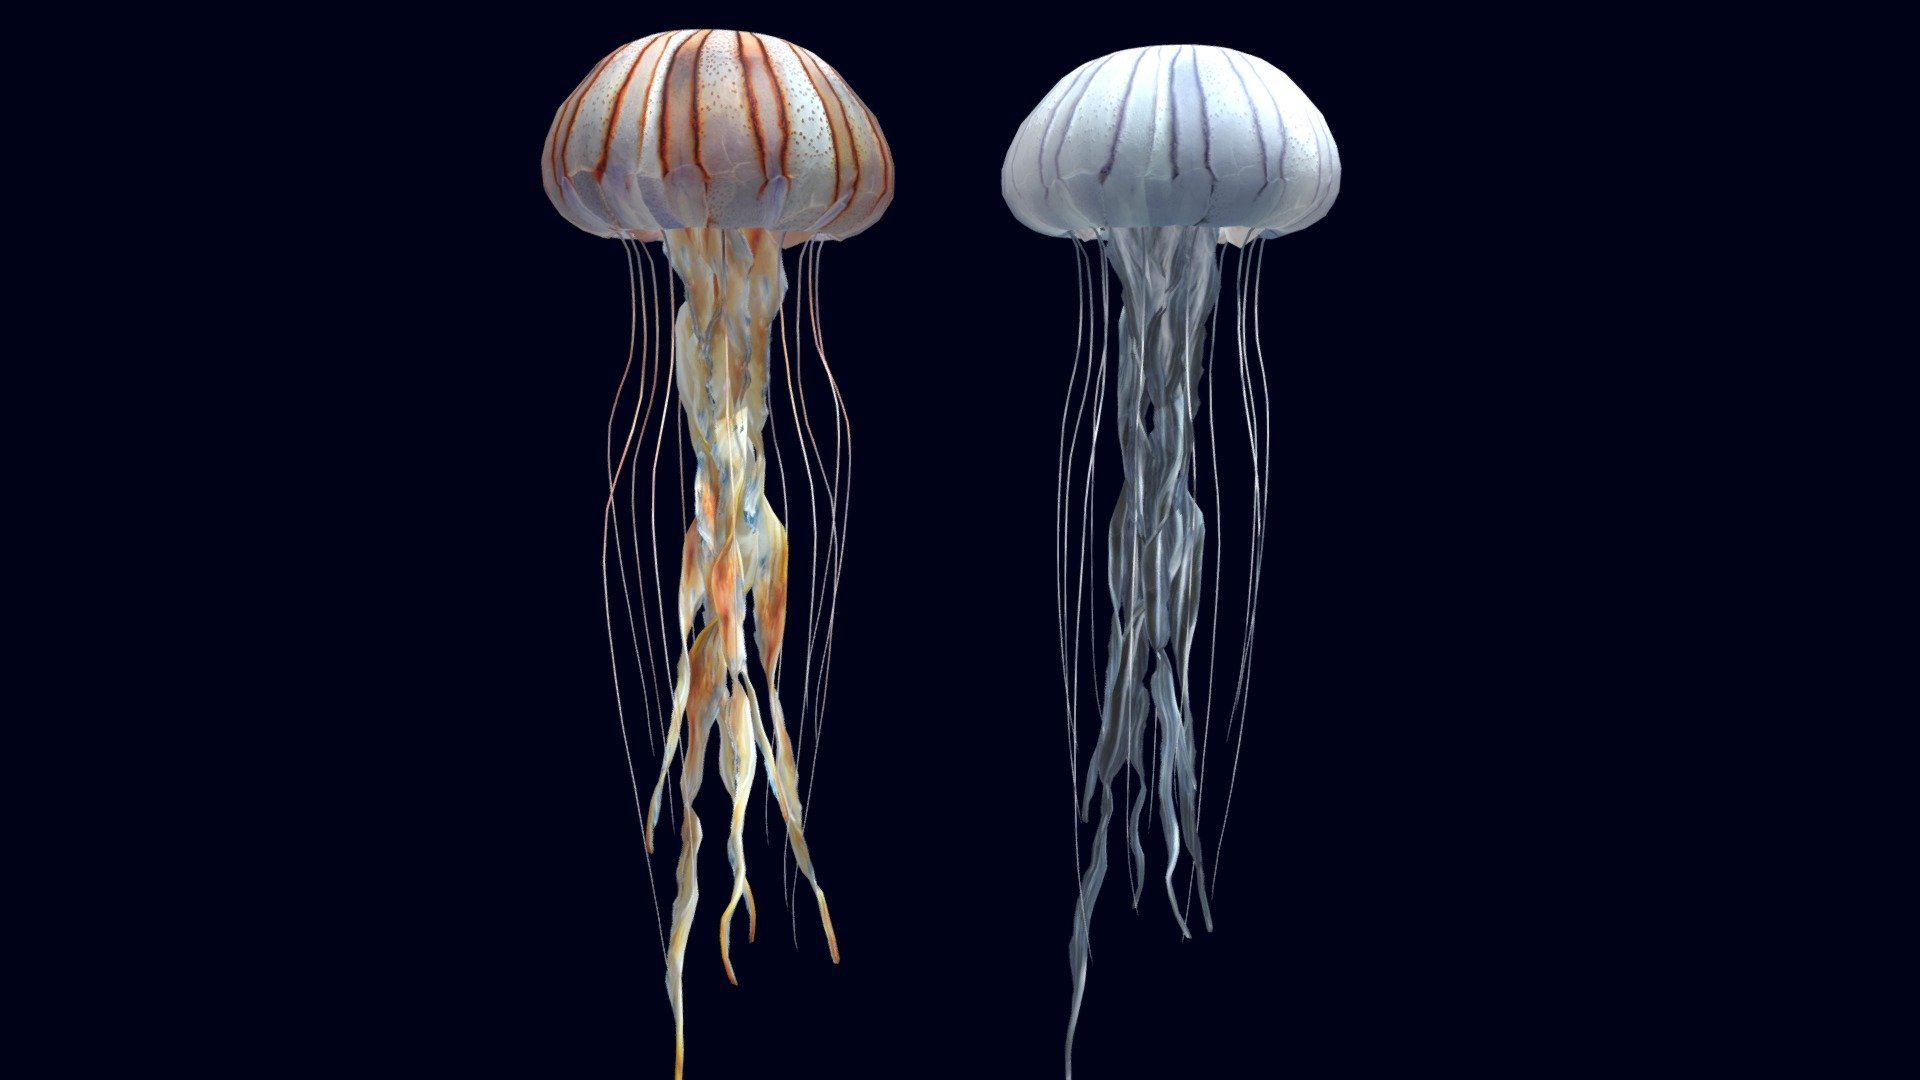 Before purchasing this model, you can free download Emperor Angelfish and try to import it. 



The Compass Jellyfish  (Chrysaora hysoscella)

This asset has 2 same models with 2 different albedo textures 4K + Metallic and Normal map

Also, the difference between these models is that the animation of the second jellyfish is offseted by several frames

The Jellyfish includes one animation loop (1-100).



Technical details:

The Jellyfishl has 11 pieces: Bell, Stomach, Oral Arms 1-8, Tentacles

Number of textures: 4

Texture dimensions: 4096 x 4096 px

Polygon count of Jellyfish Pulmo: Tris 10916

Animation count: 1

UV mapping: Yes - Compass Jellyfish - Buy Royalty Free 3D model by CGSoul 3d model